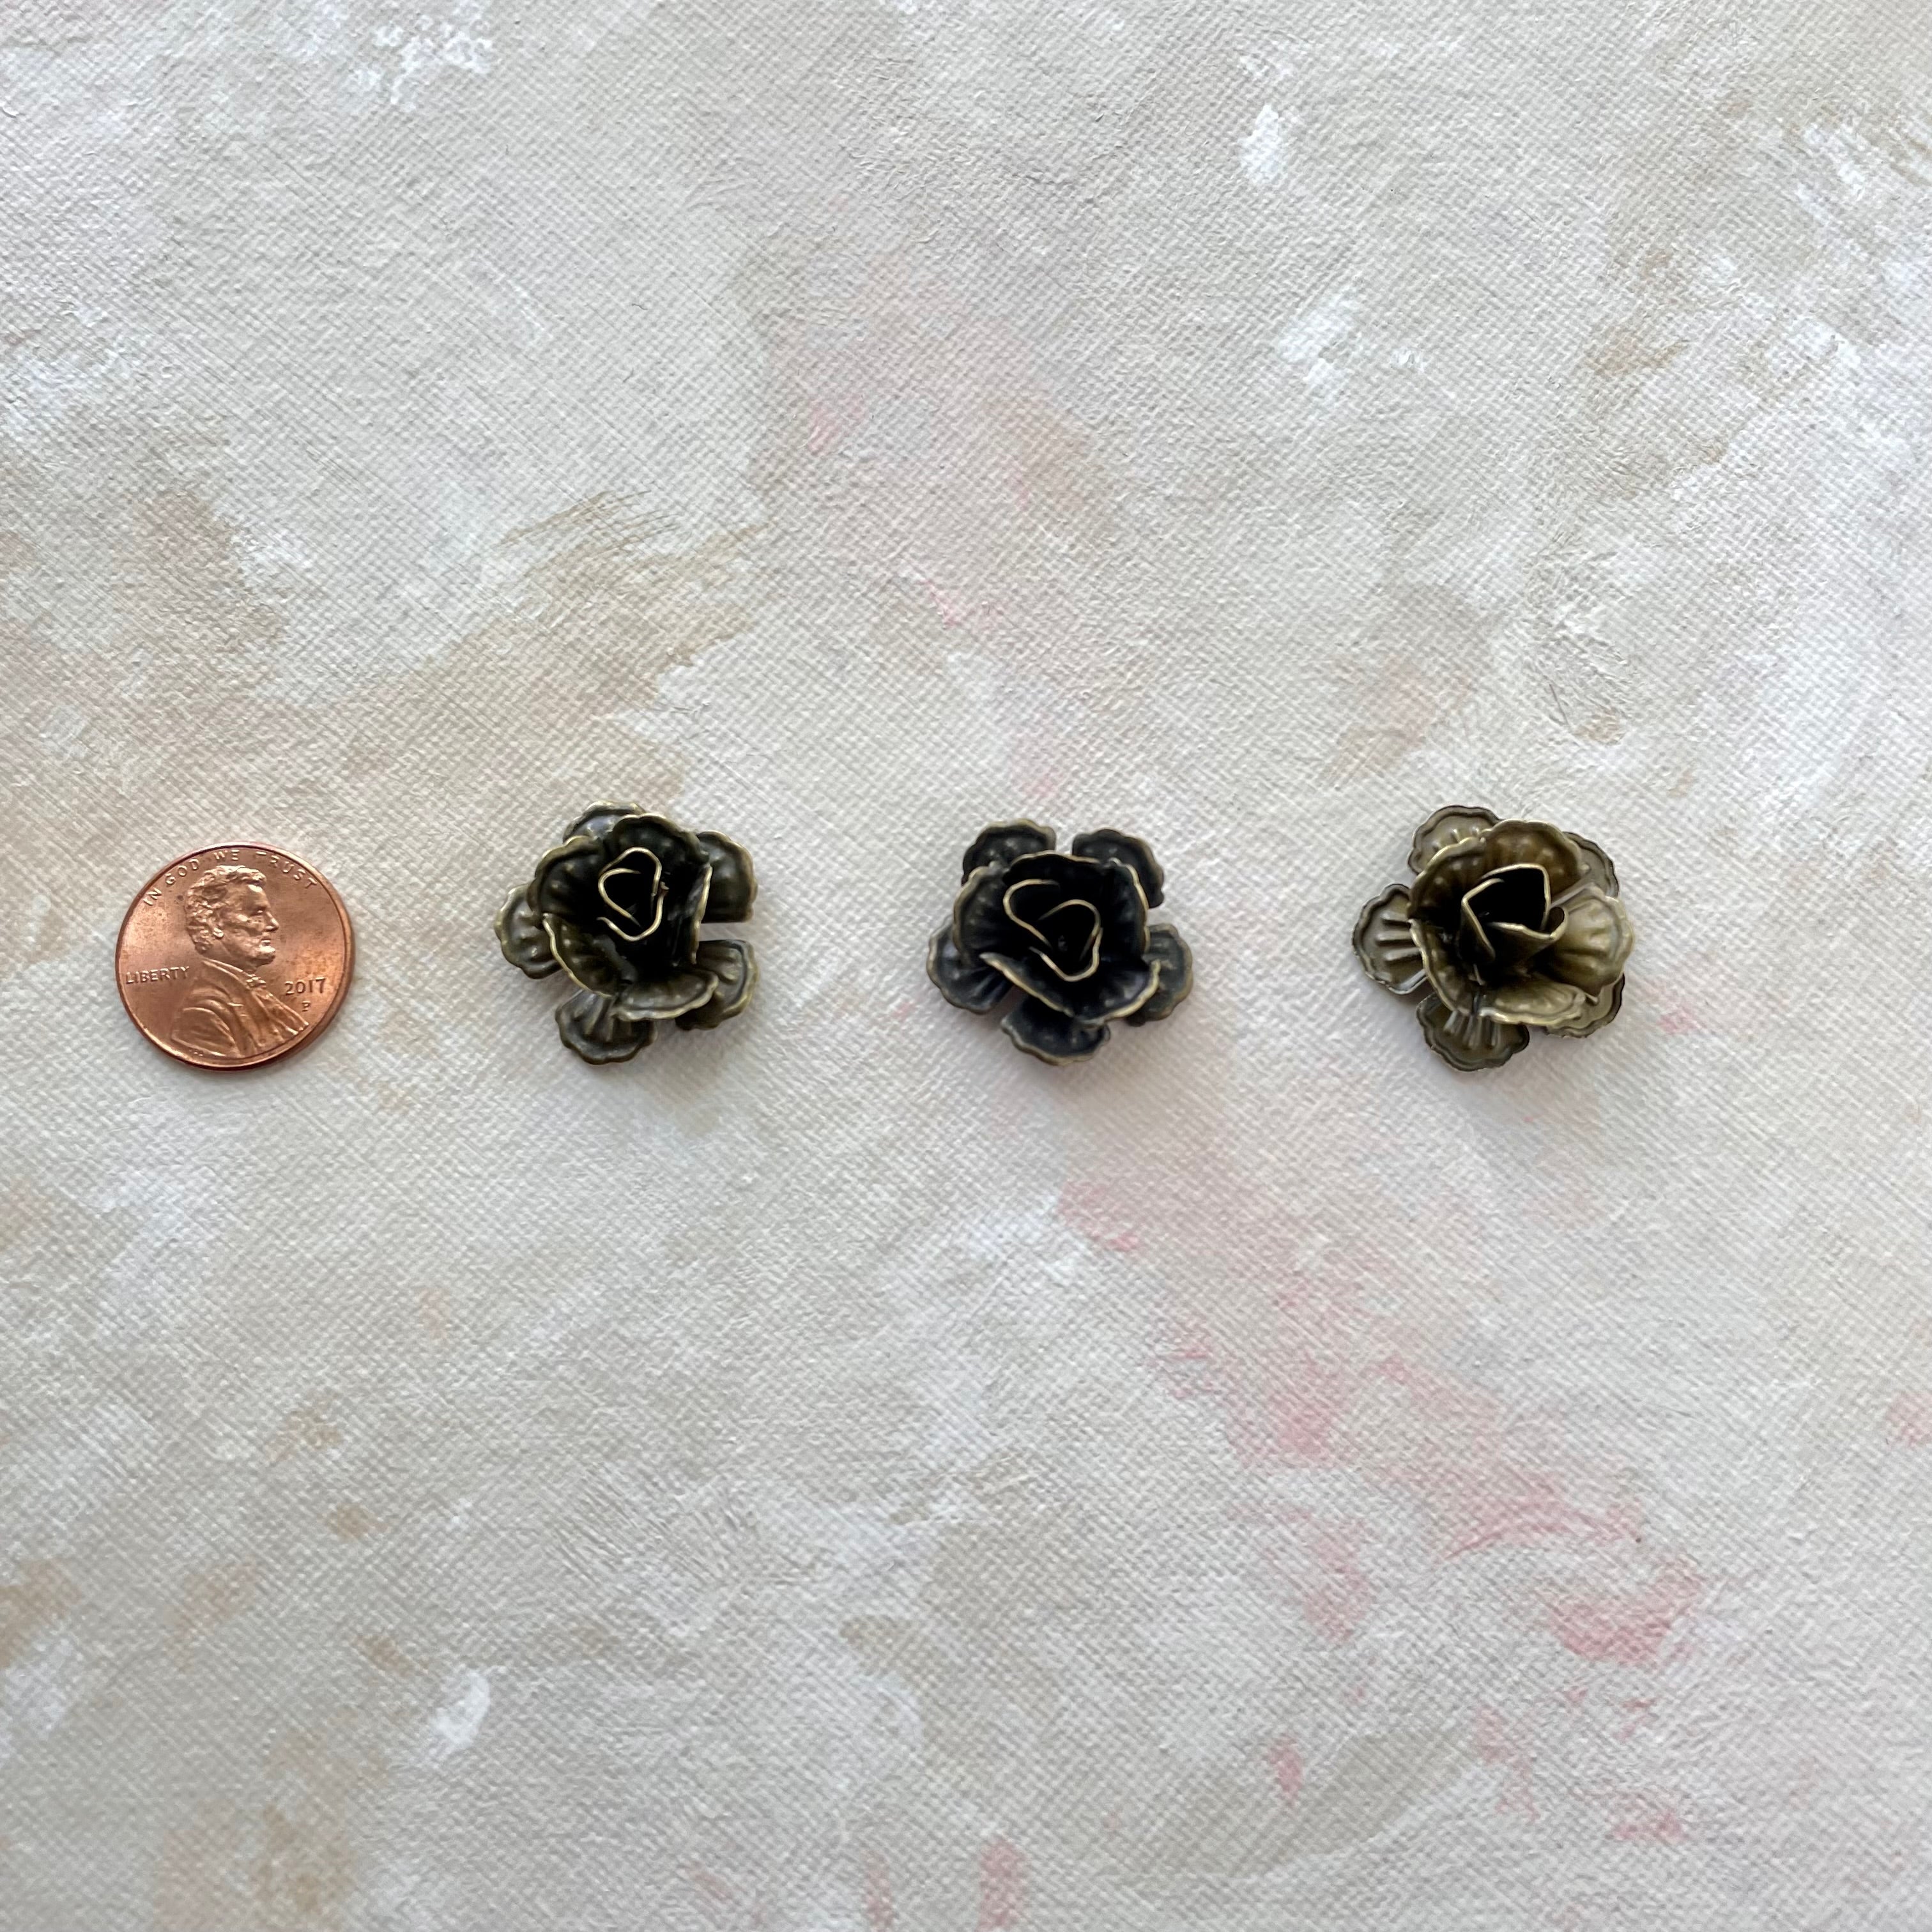 3 small metal styling flower with penny beside for size reference - flat lay props from Champagne & GRIT